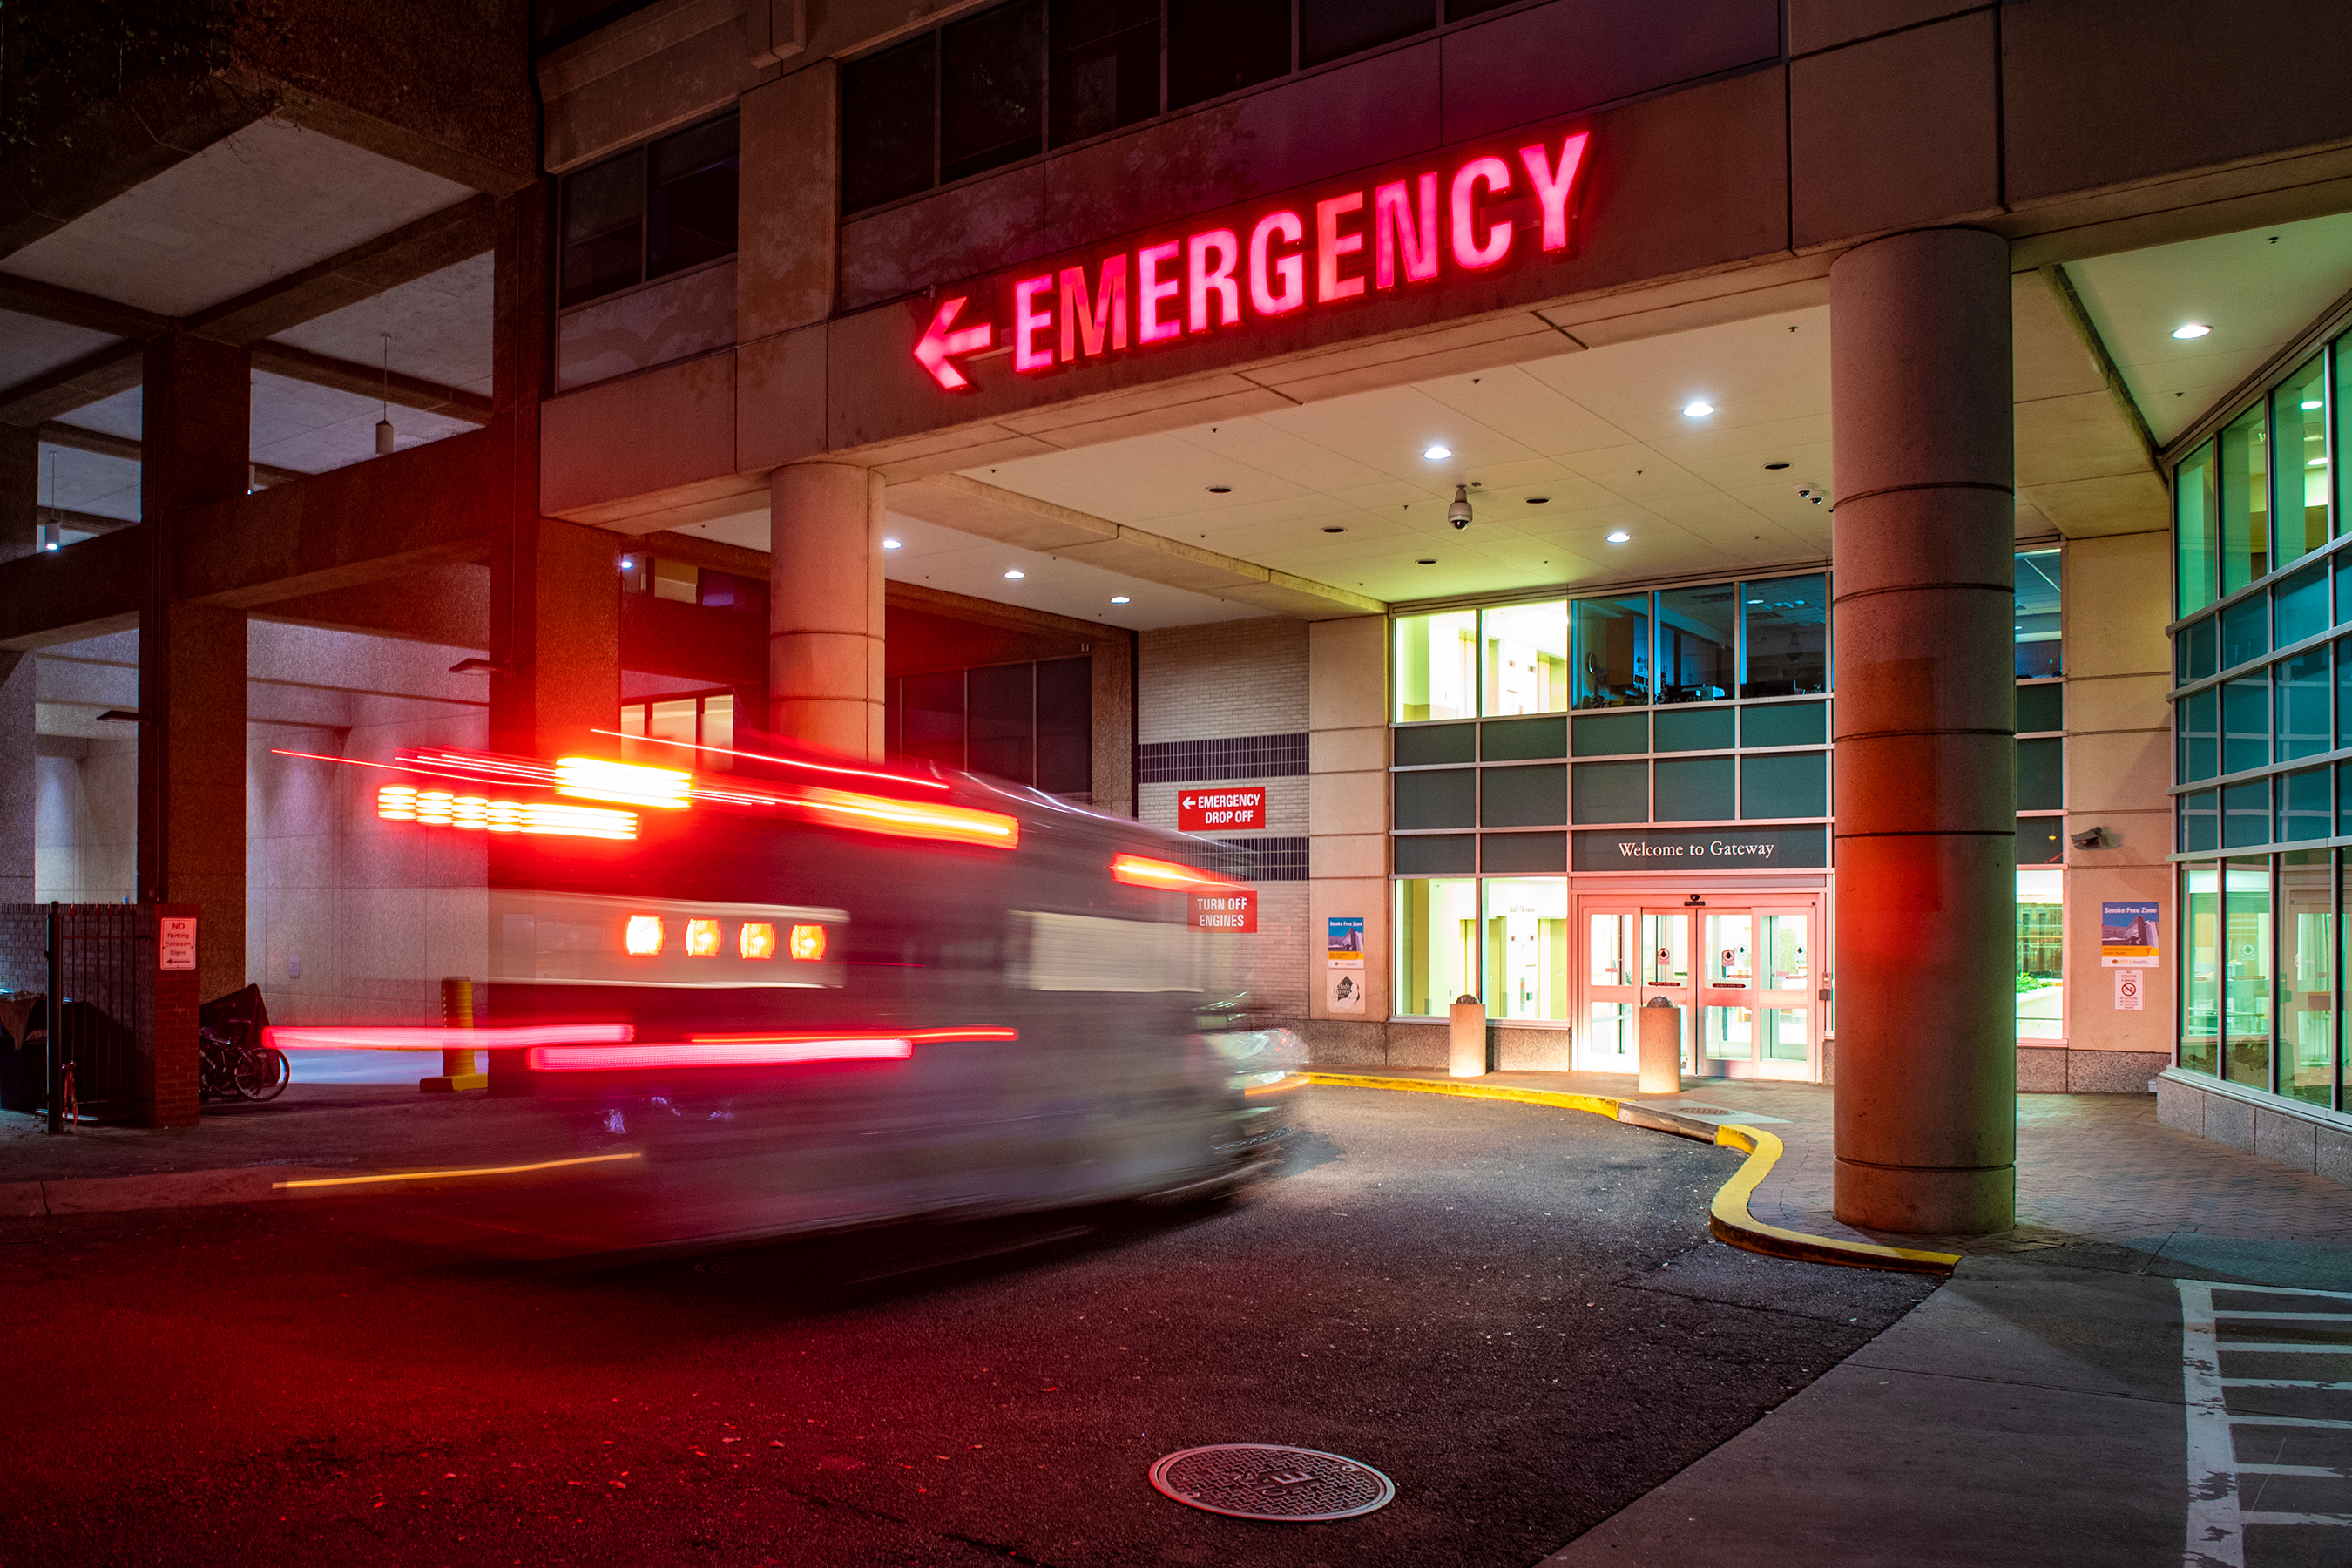 News from the Department of Emergency Medicine